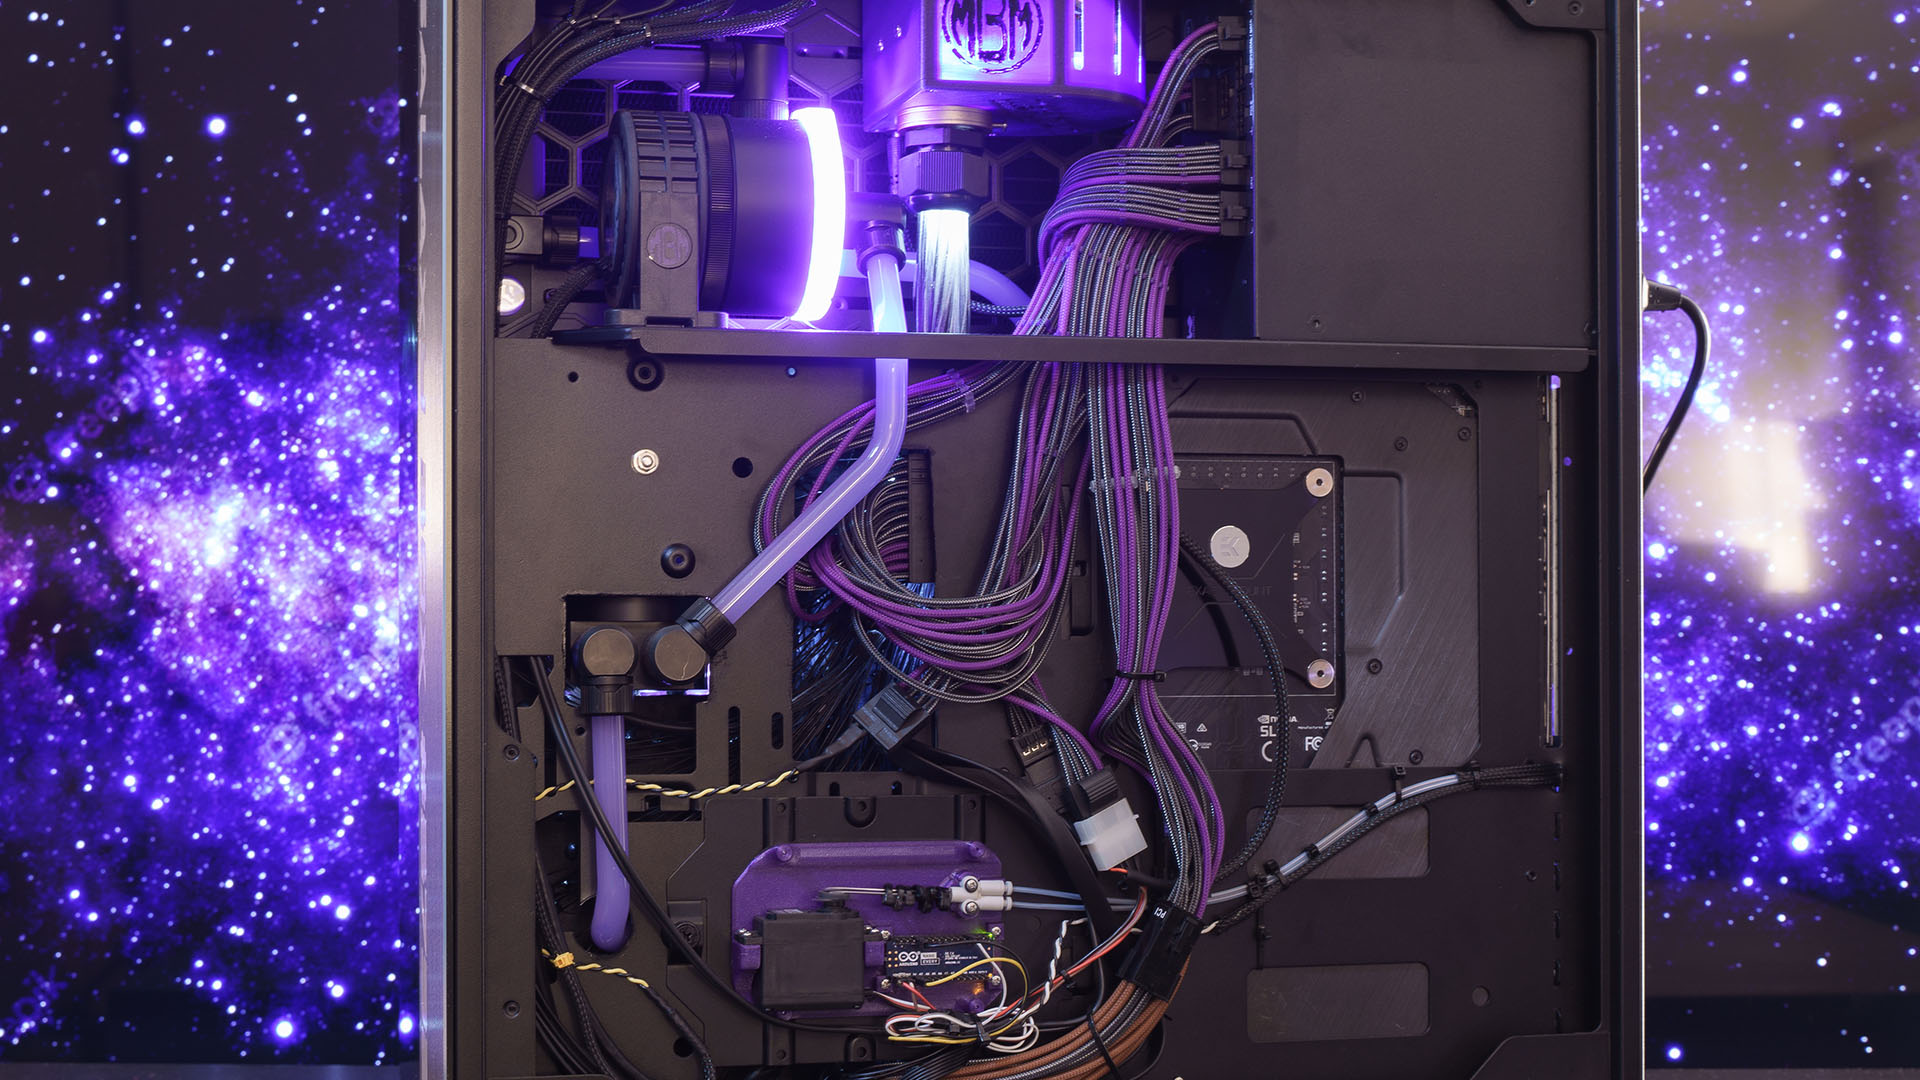 The rear of the build, featuring all its cable management